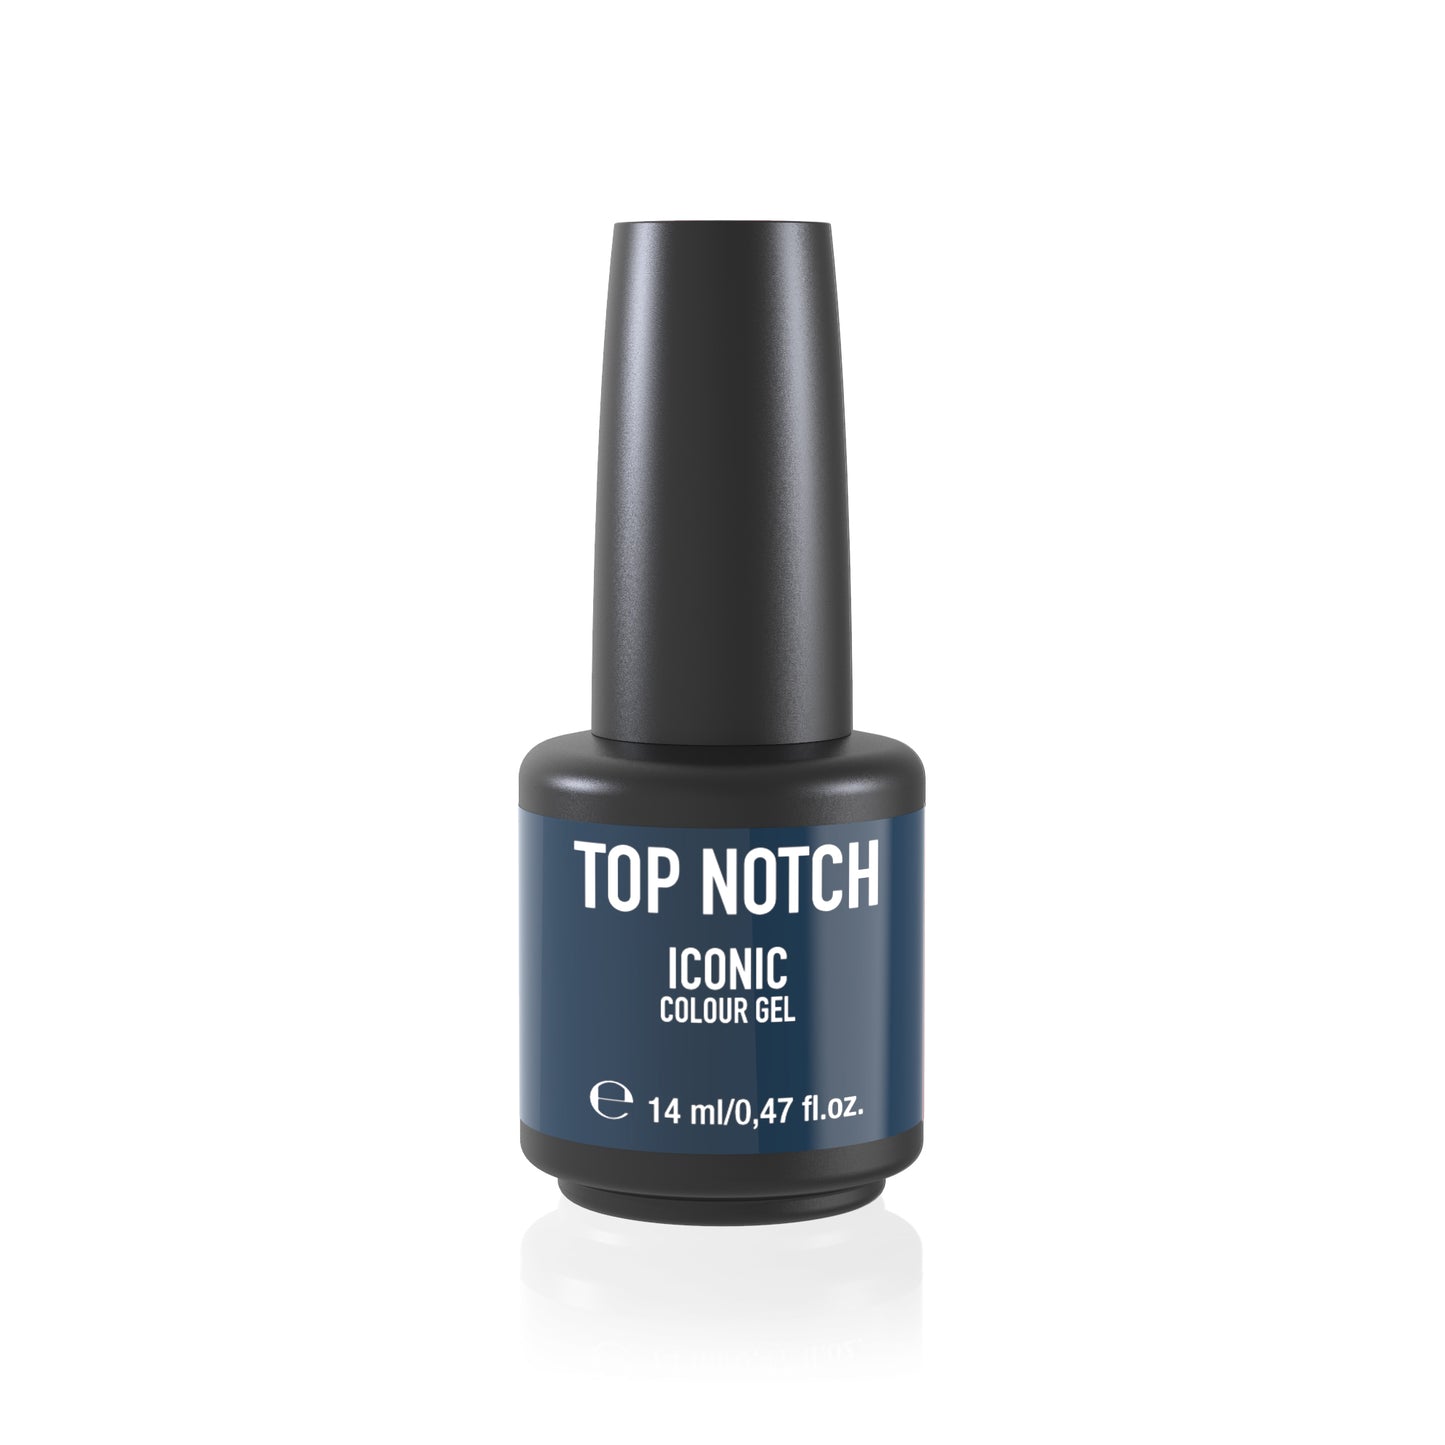 Mesauda - Top Notch Iconic - Bourgeois Collection 14ml